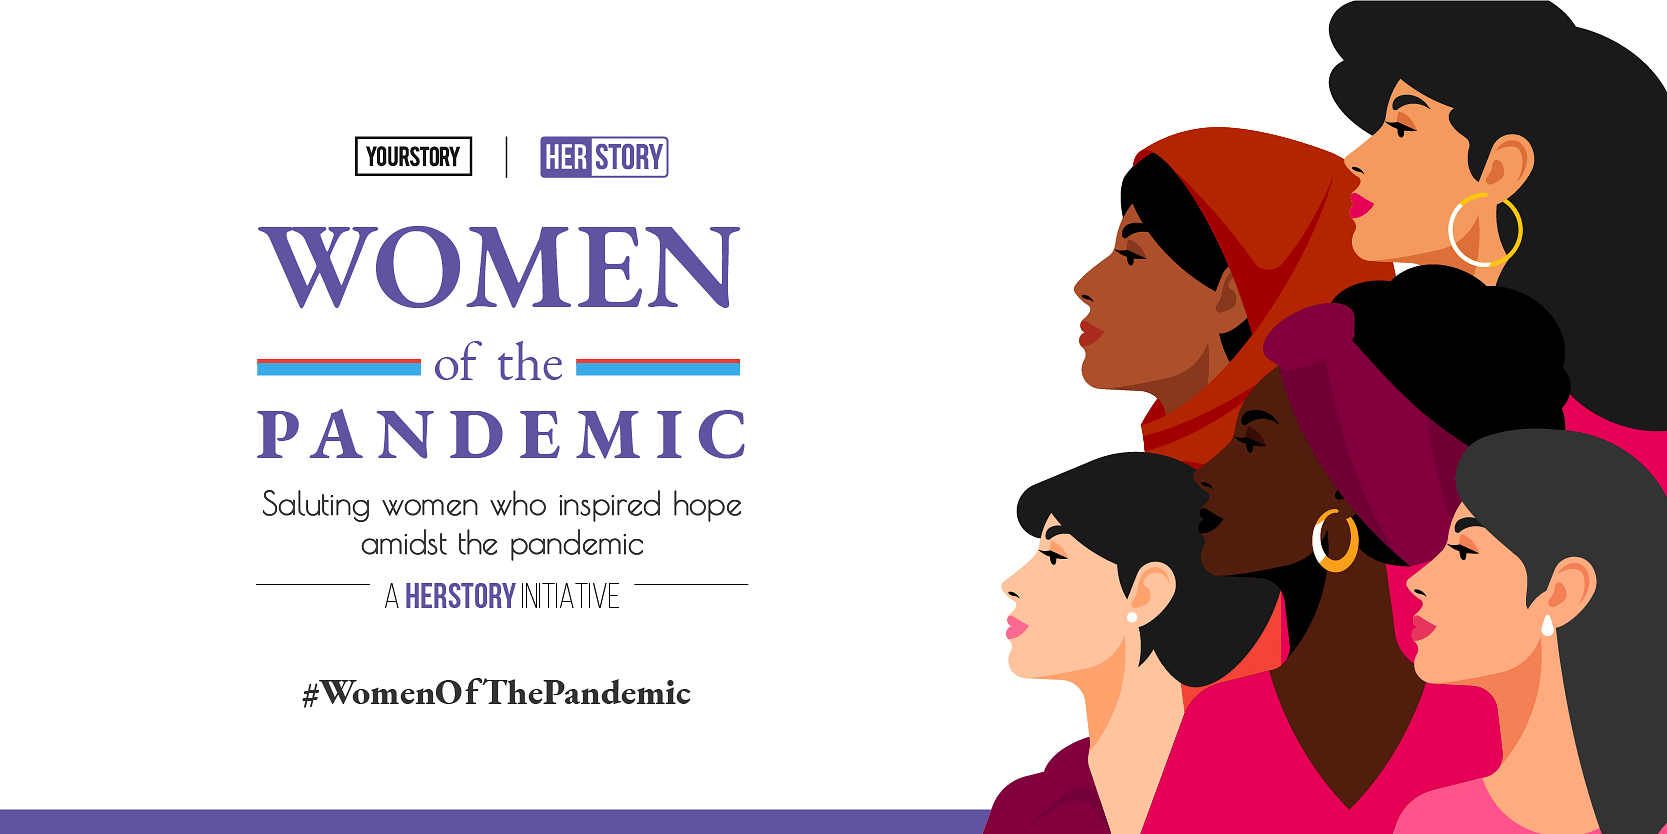 [Women of the Pandemic] The virus has definitely taught us how quickly we are capable of adapting to changes, says Shivangi Mudgil of Appscrip